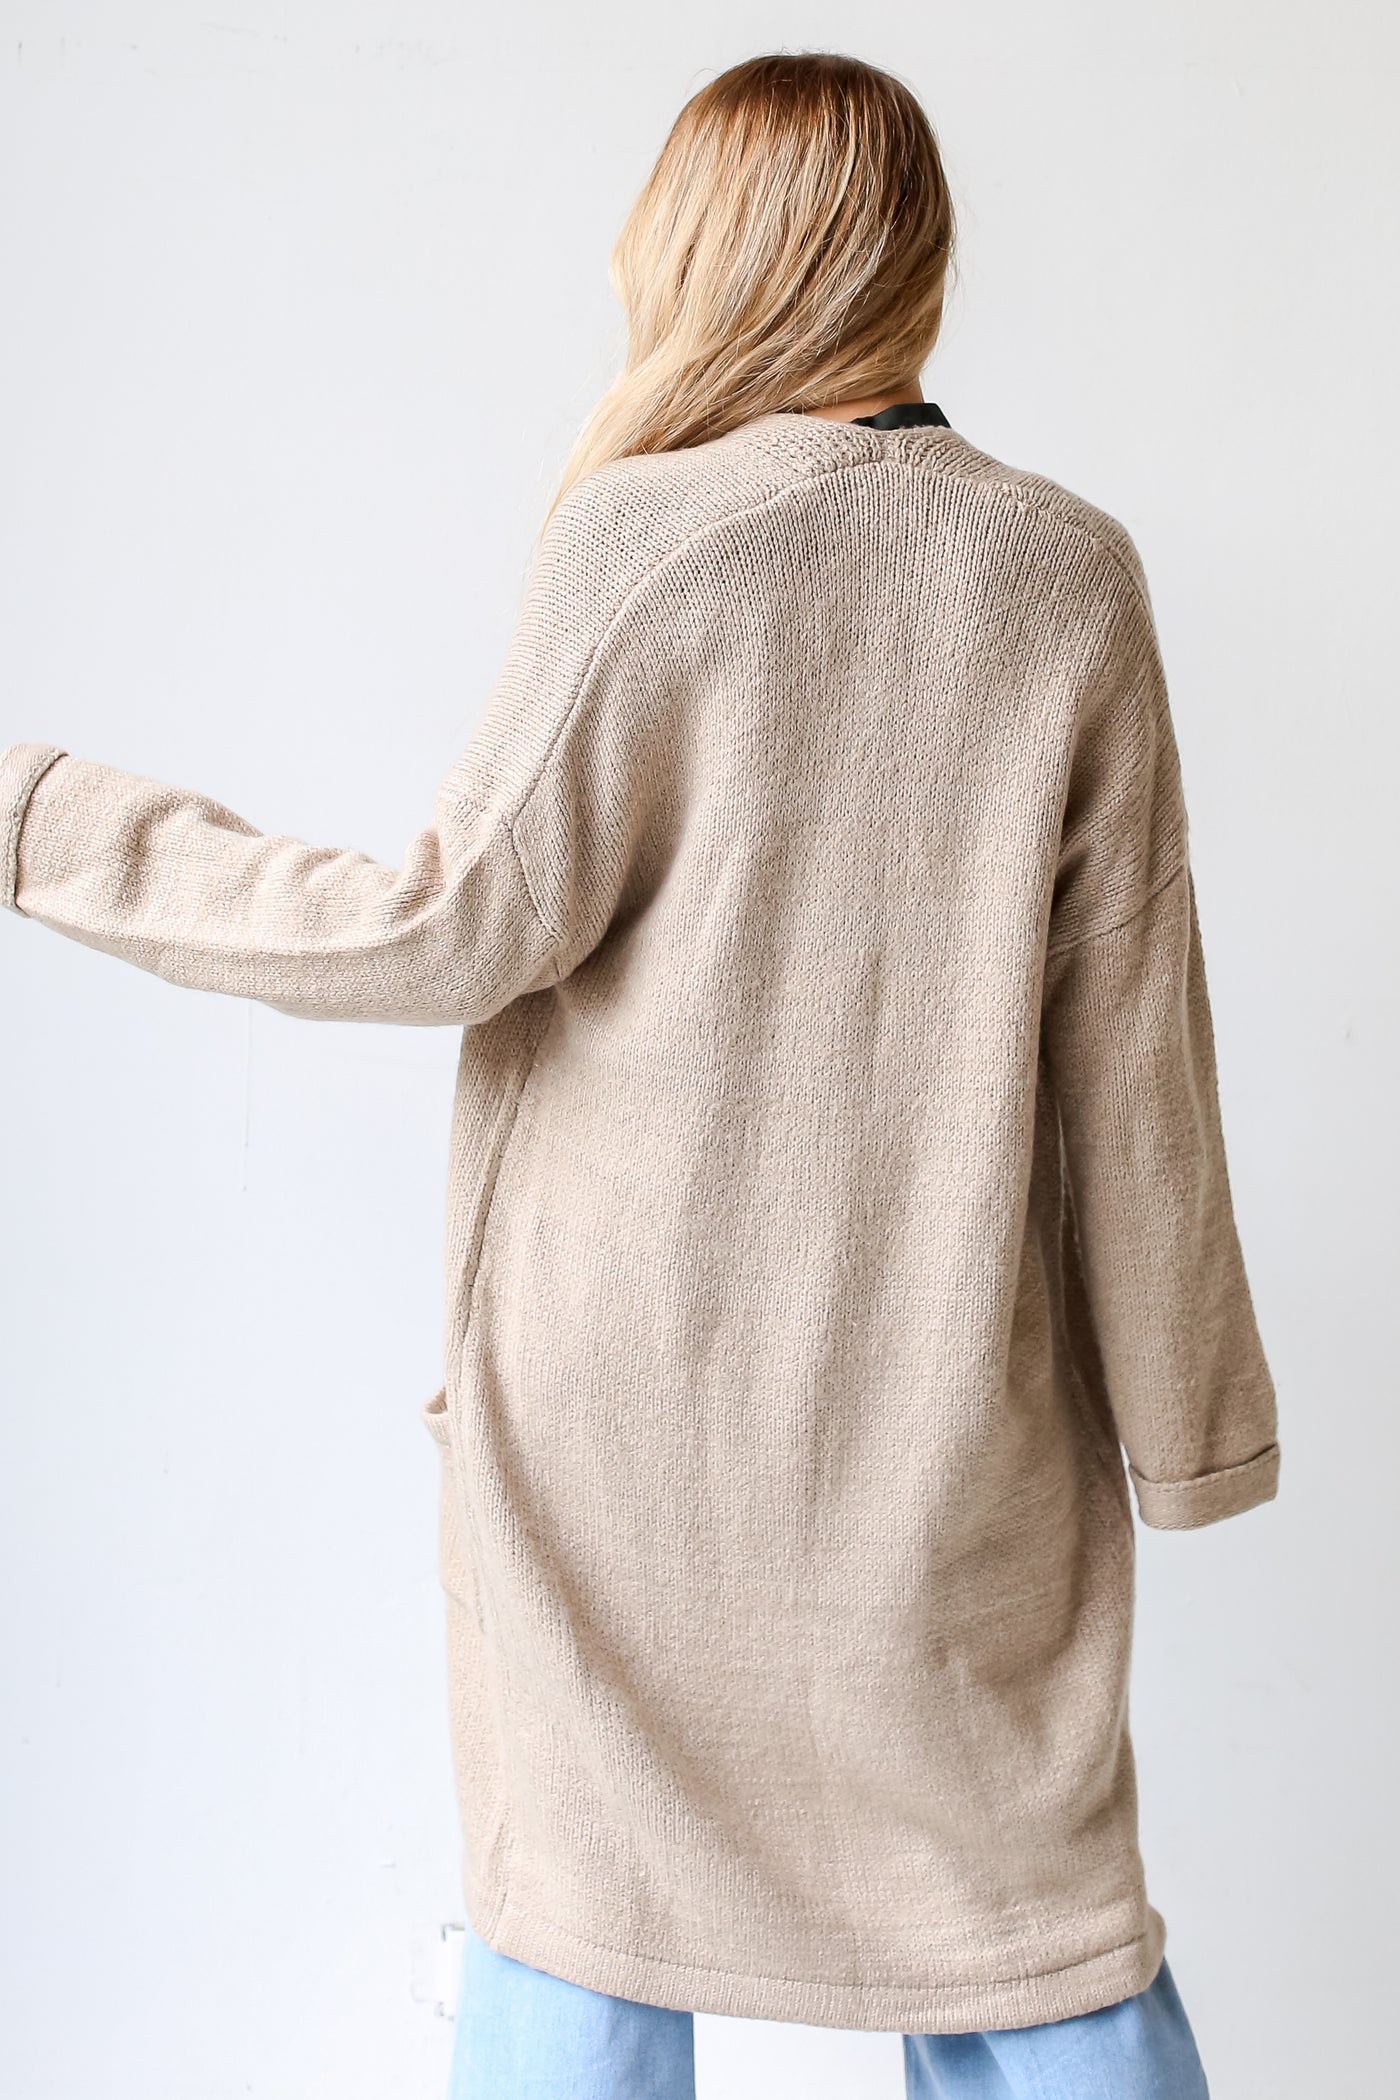 cozy taupe Longline Cardigan for fall